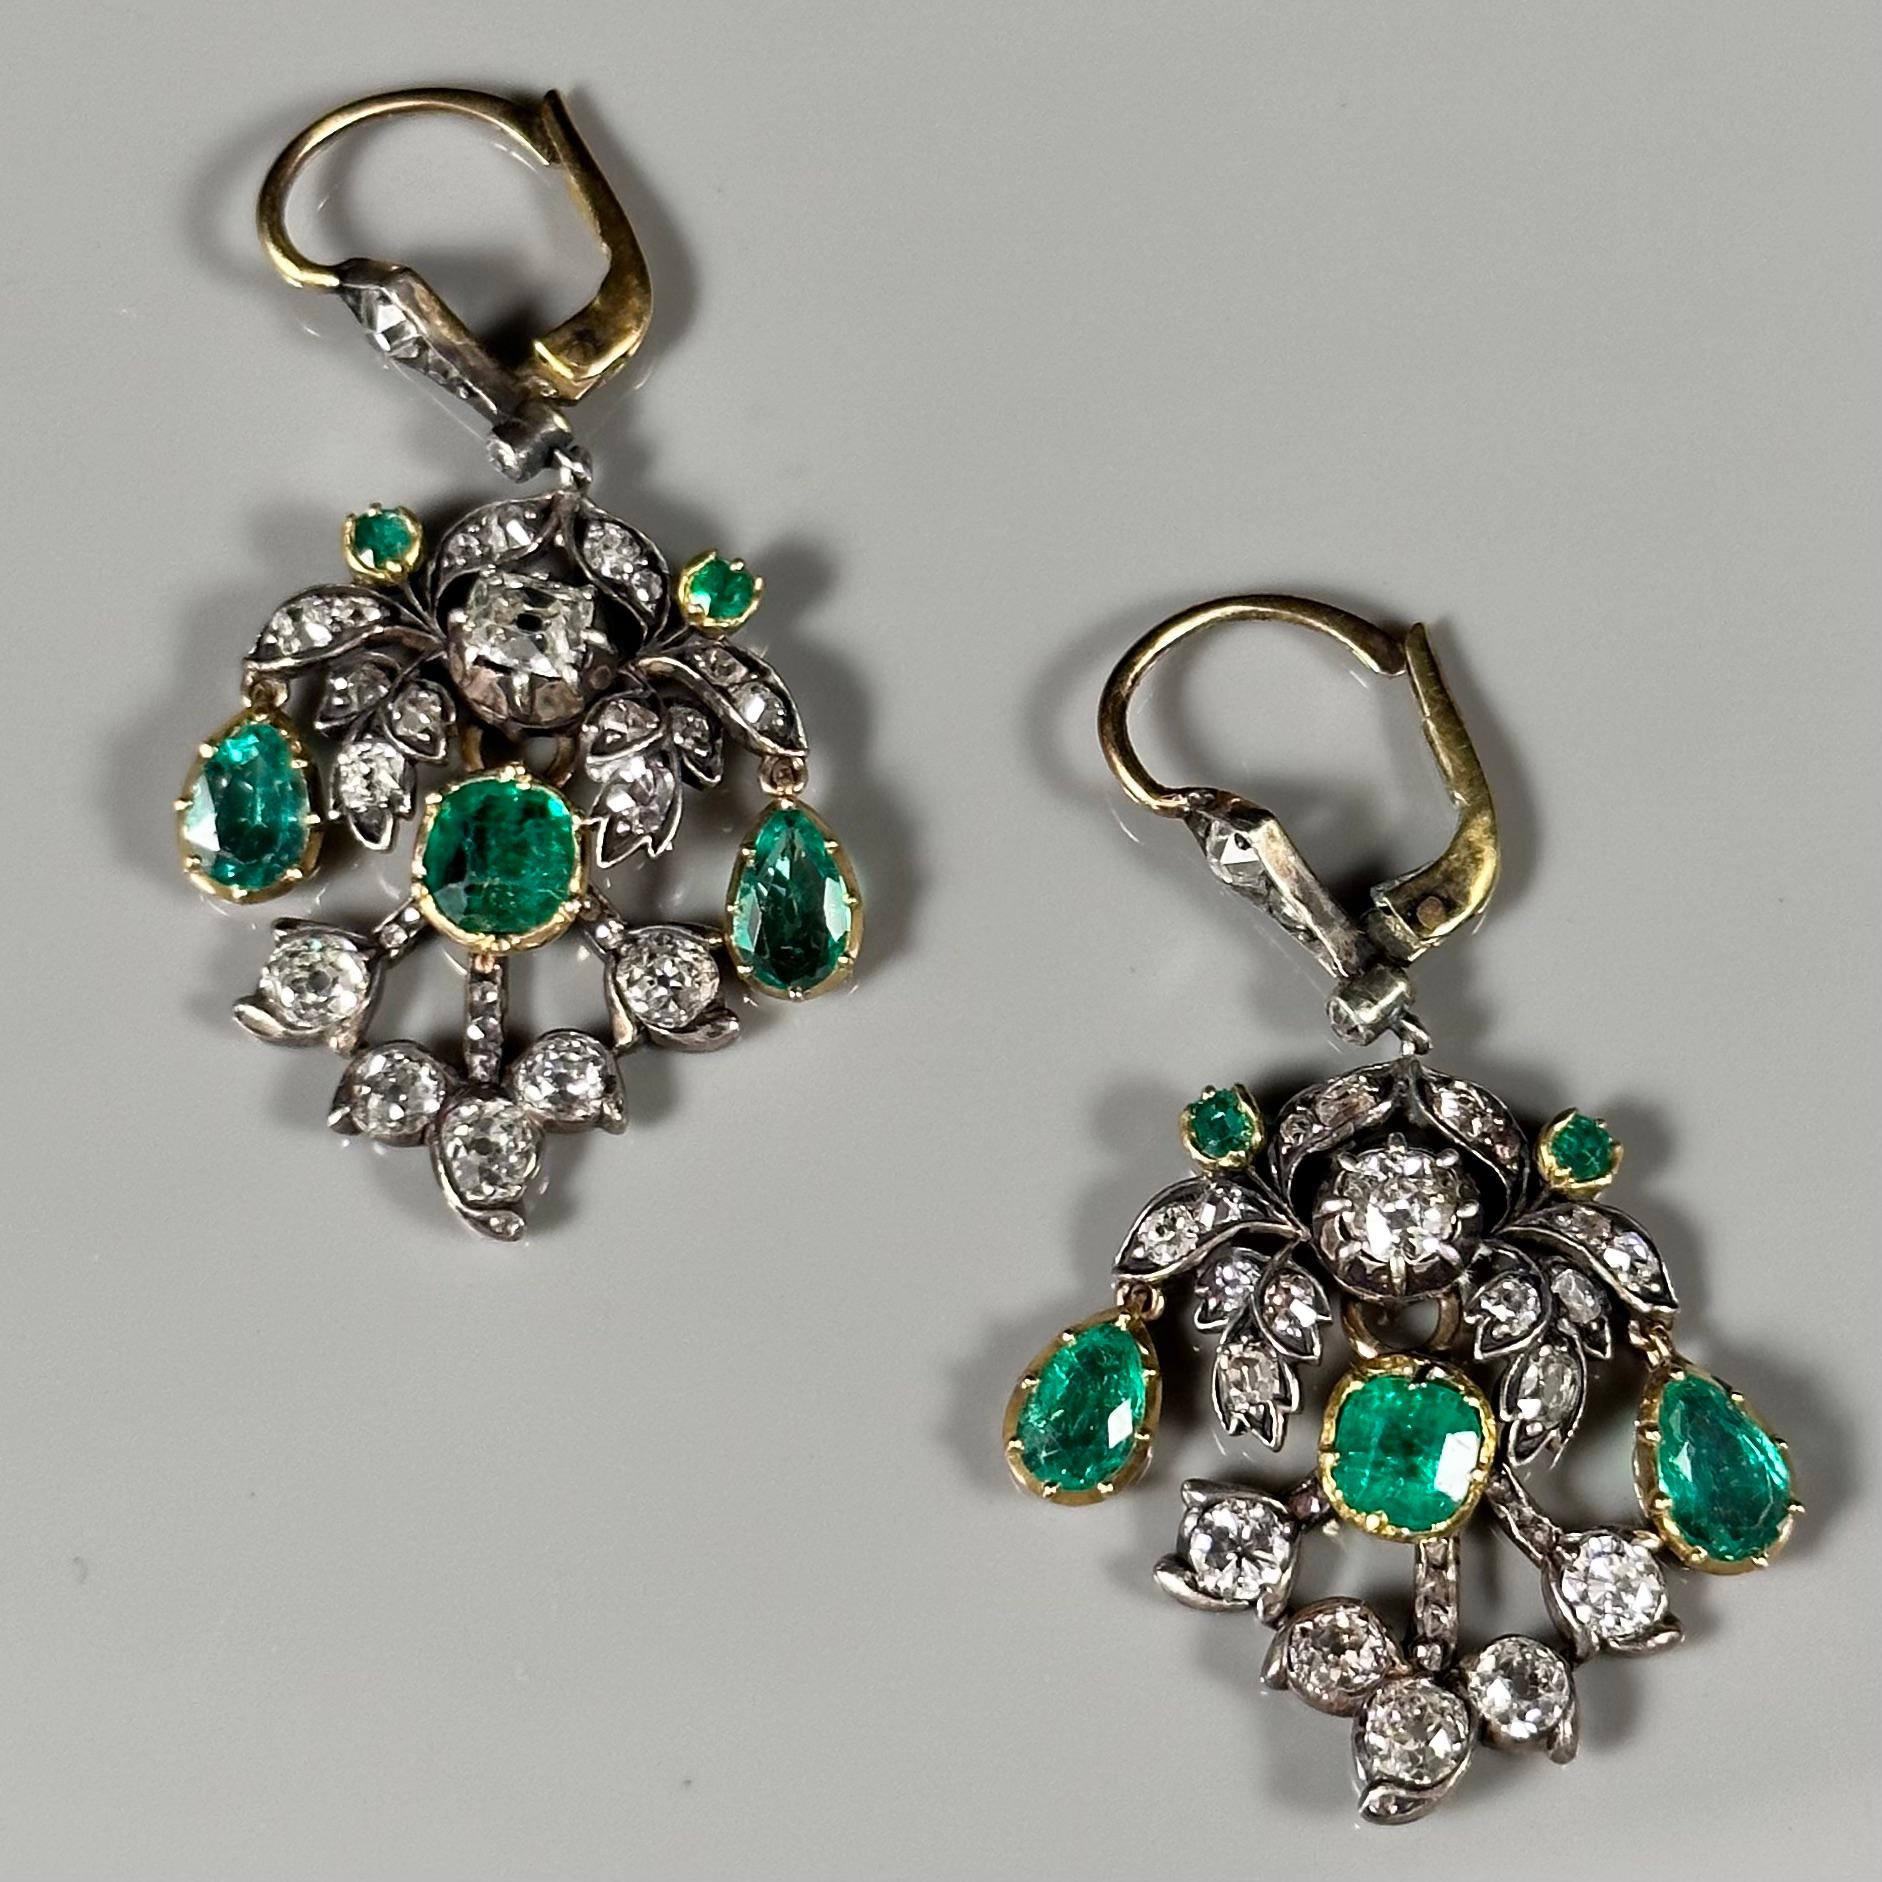 Antique La Belle Epoque Colombian emerald and diamond chandelier drop earrings in silver and yellow gold, circa 1915, possibly Portuguese, in fitted case by Reis & Filhos Porto jewelers. Each earring of an articulated floral and foliate design is